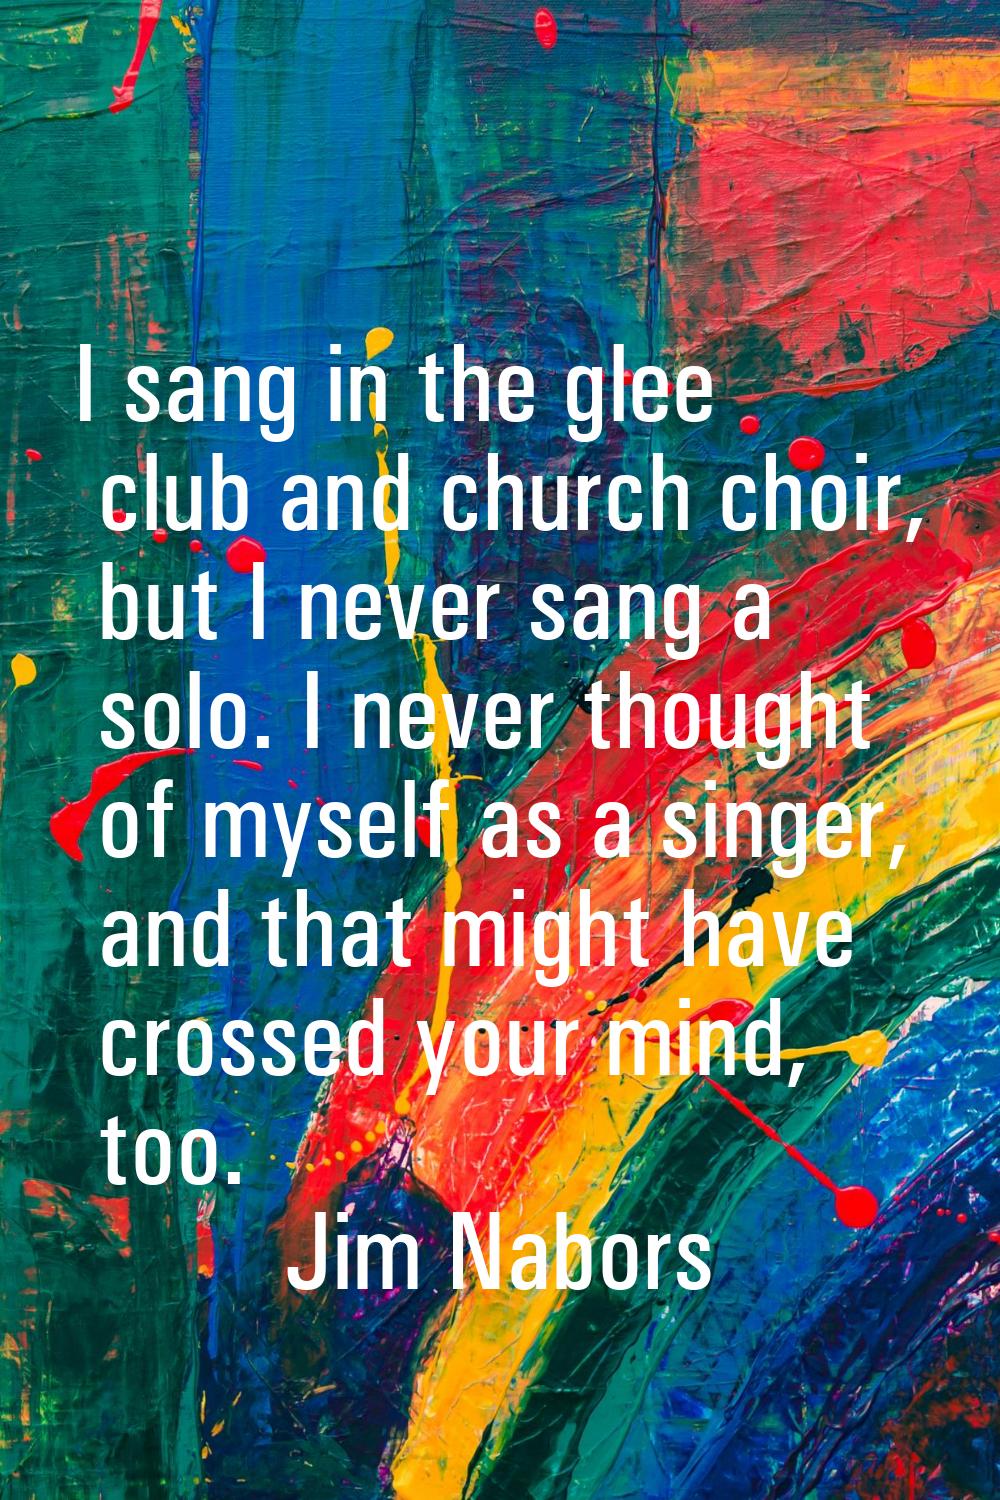 I sang in the glee club and church choir, but I never sang a solo. I never thought of myself as a s